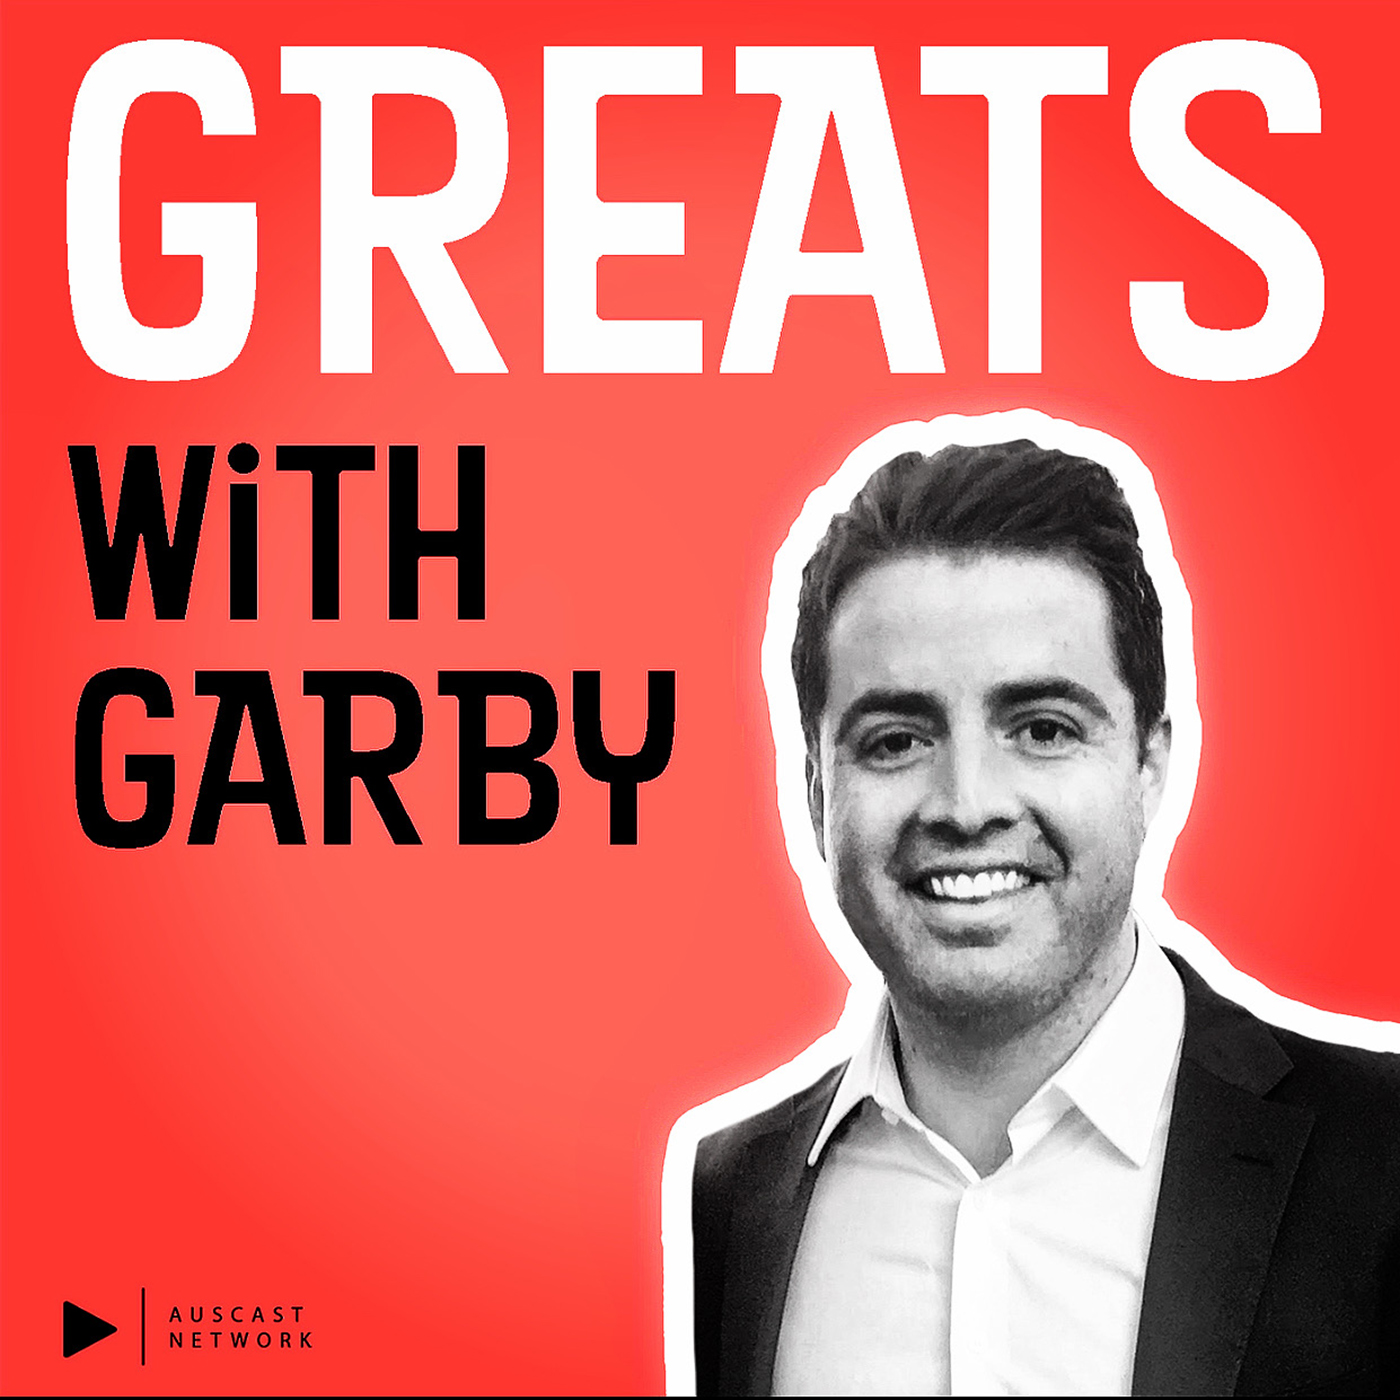 Craig Parry - Greats with Garby